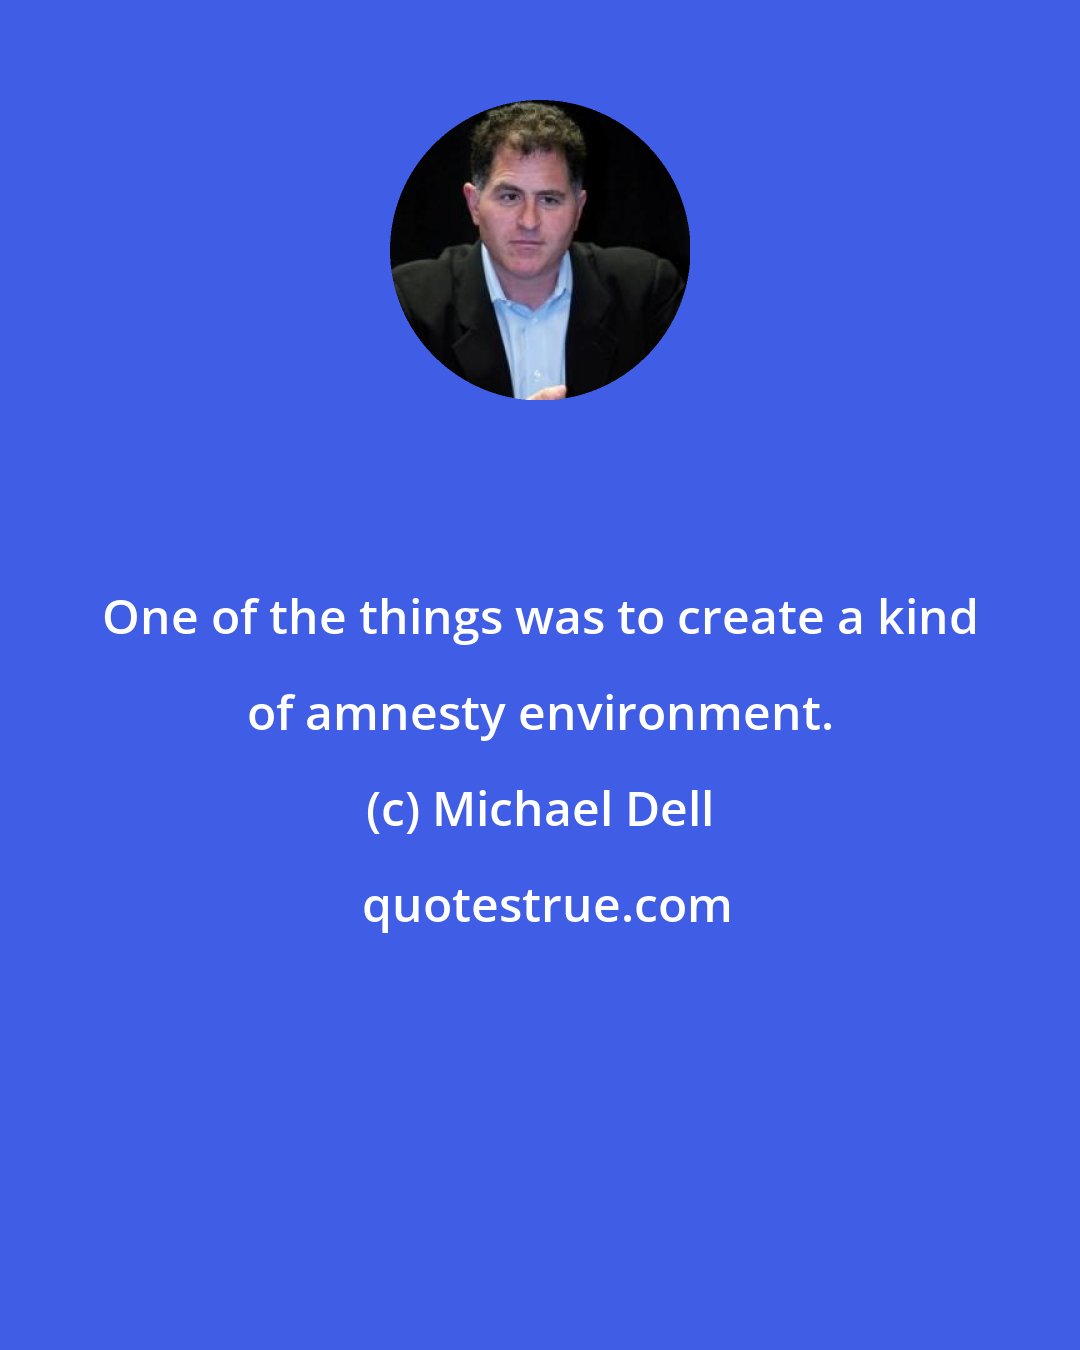 Michael Dell: One of the things was to create a kind of amnesty environment.